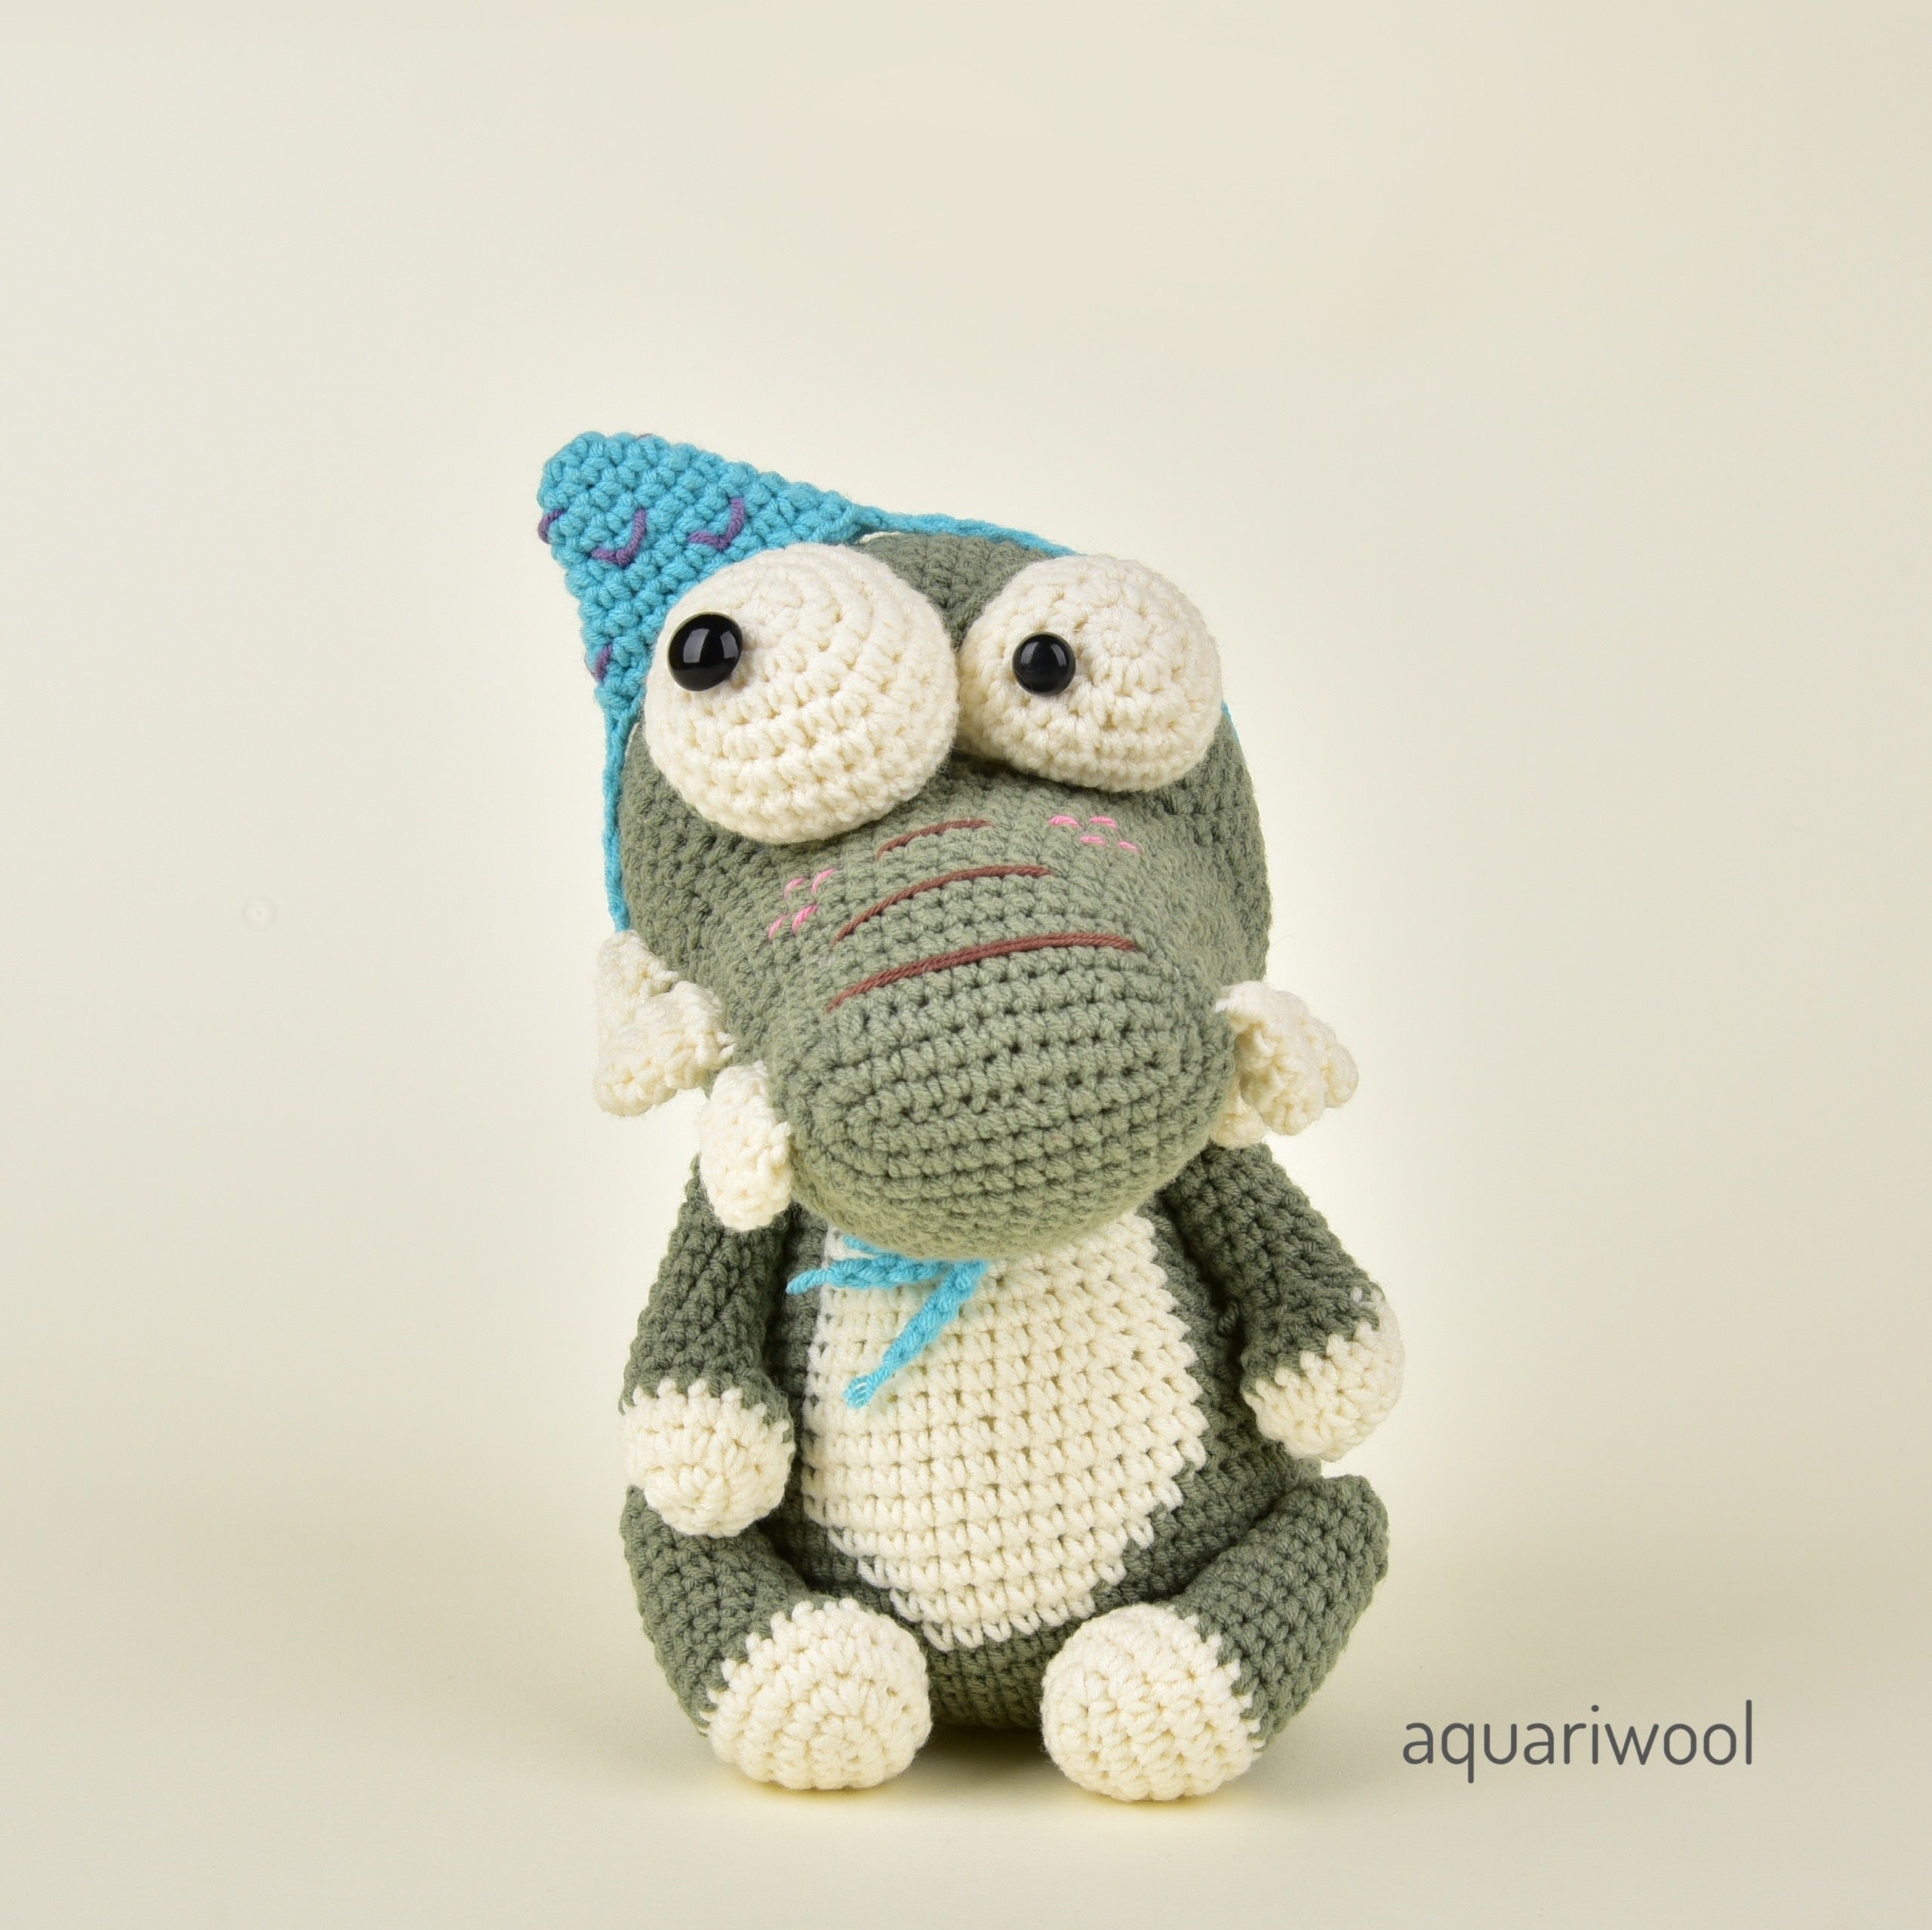 Mr. Coco The Crocodile Crochet Pattern by Aquariwool Crochet (Crochet Doll Pattern/Amigurumi Pattern for Baby gift)